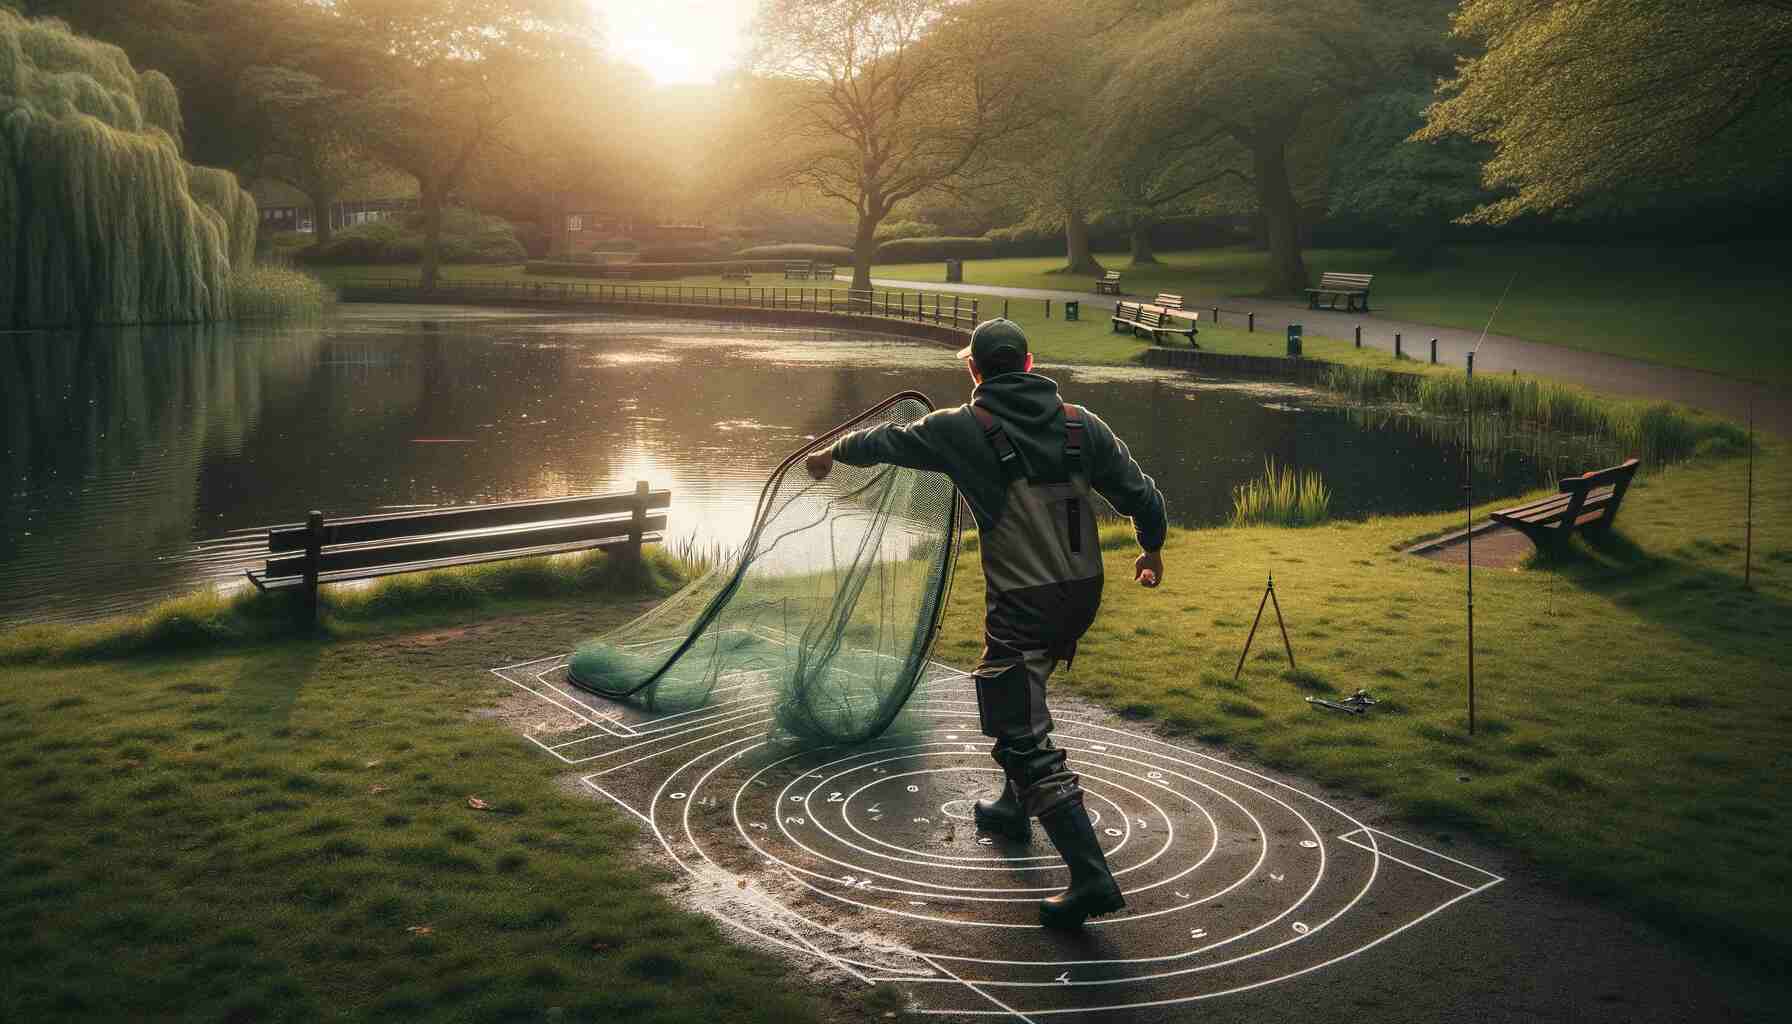 An angler practicing their cast net throwing technique in a peaceful park setting near a lake.